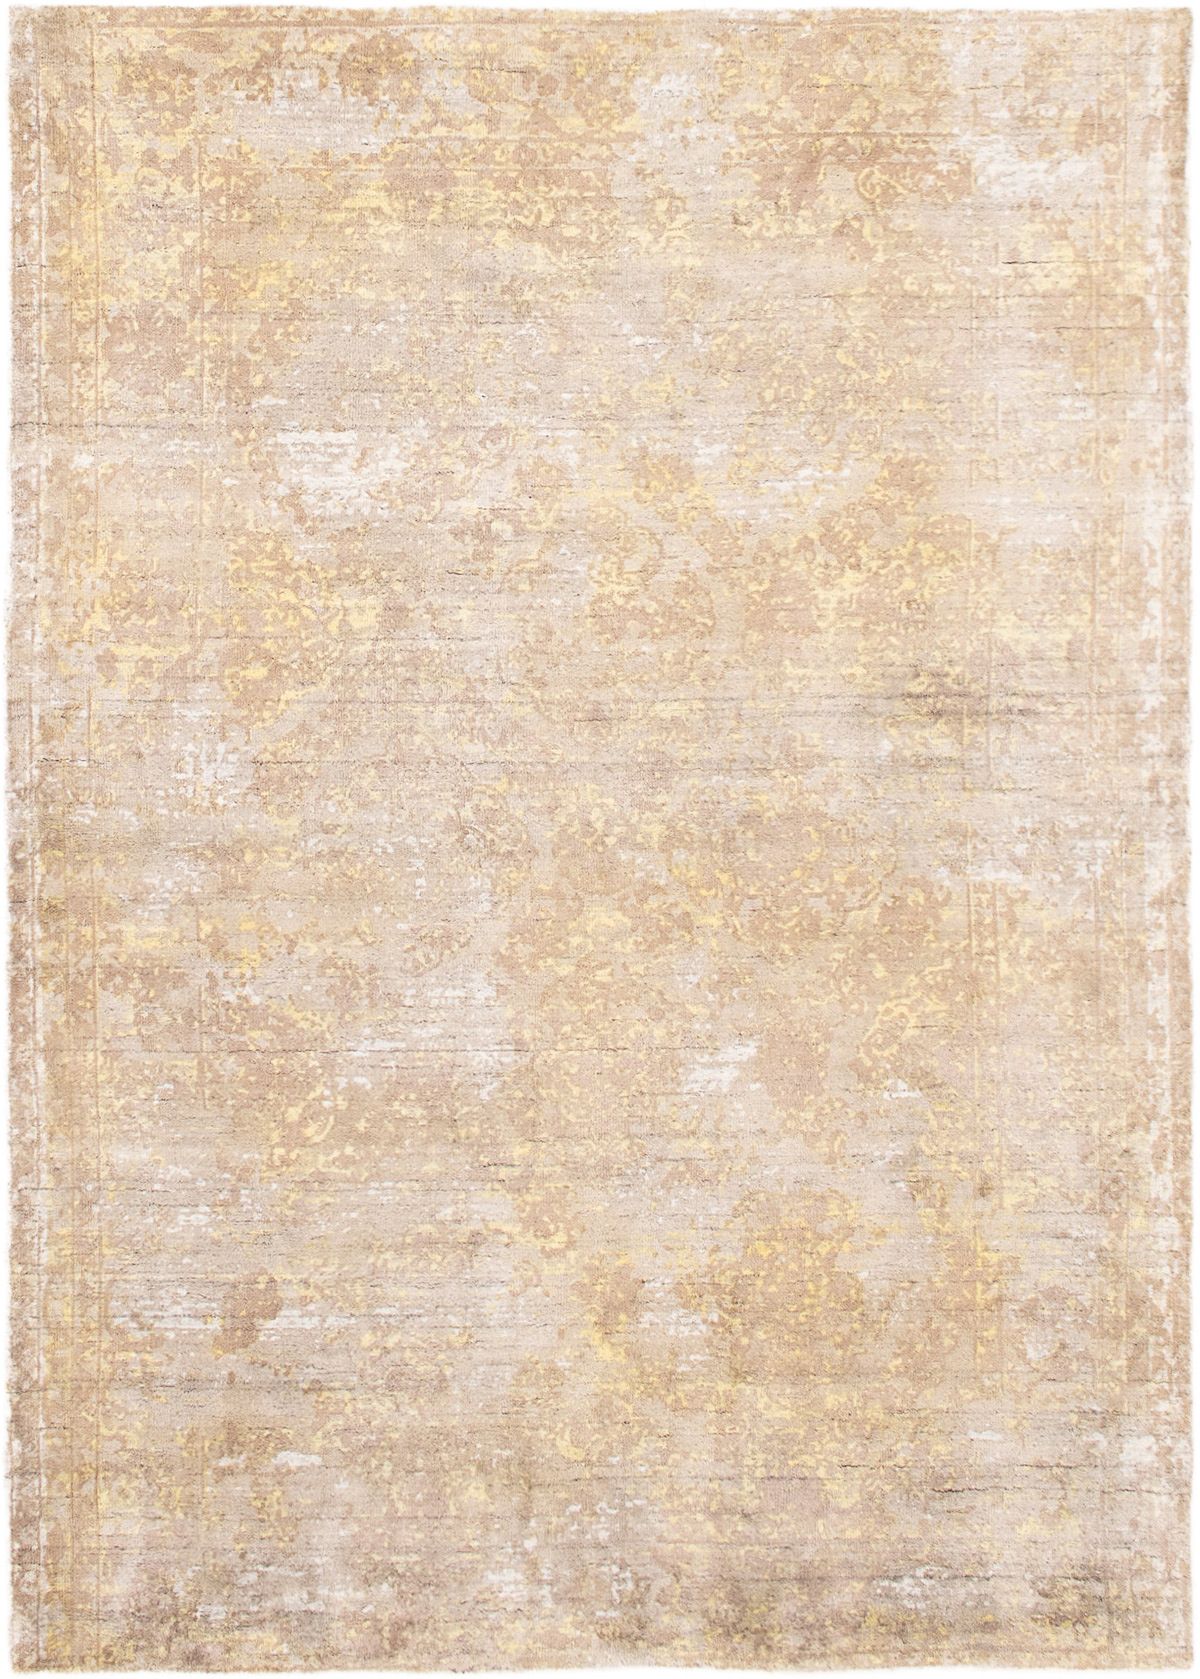 Hand-knotted Eternity Tan Wool Rug 5'3" x 7'5"  Size: 5'3" x 7'5"  